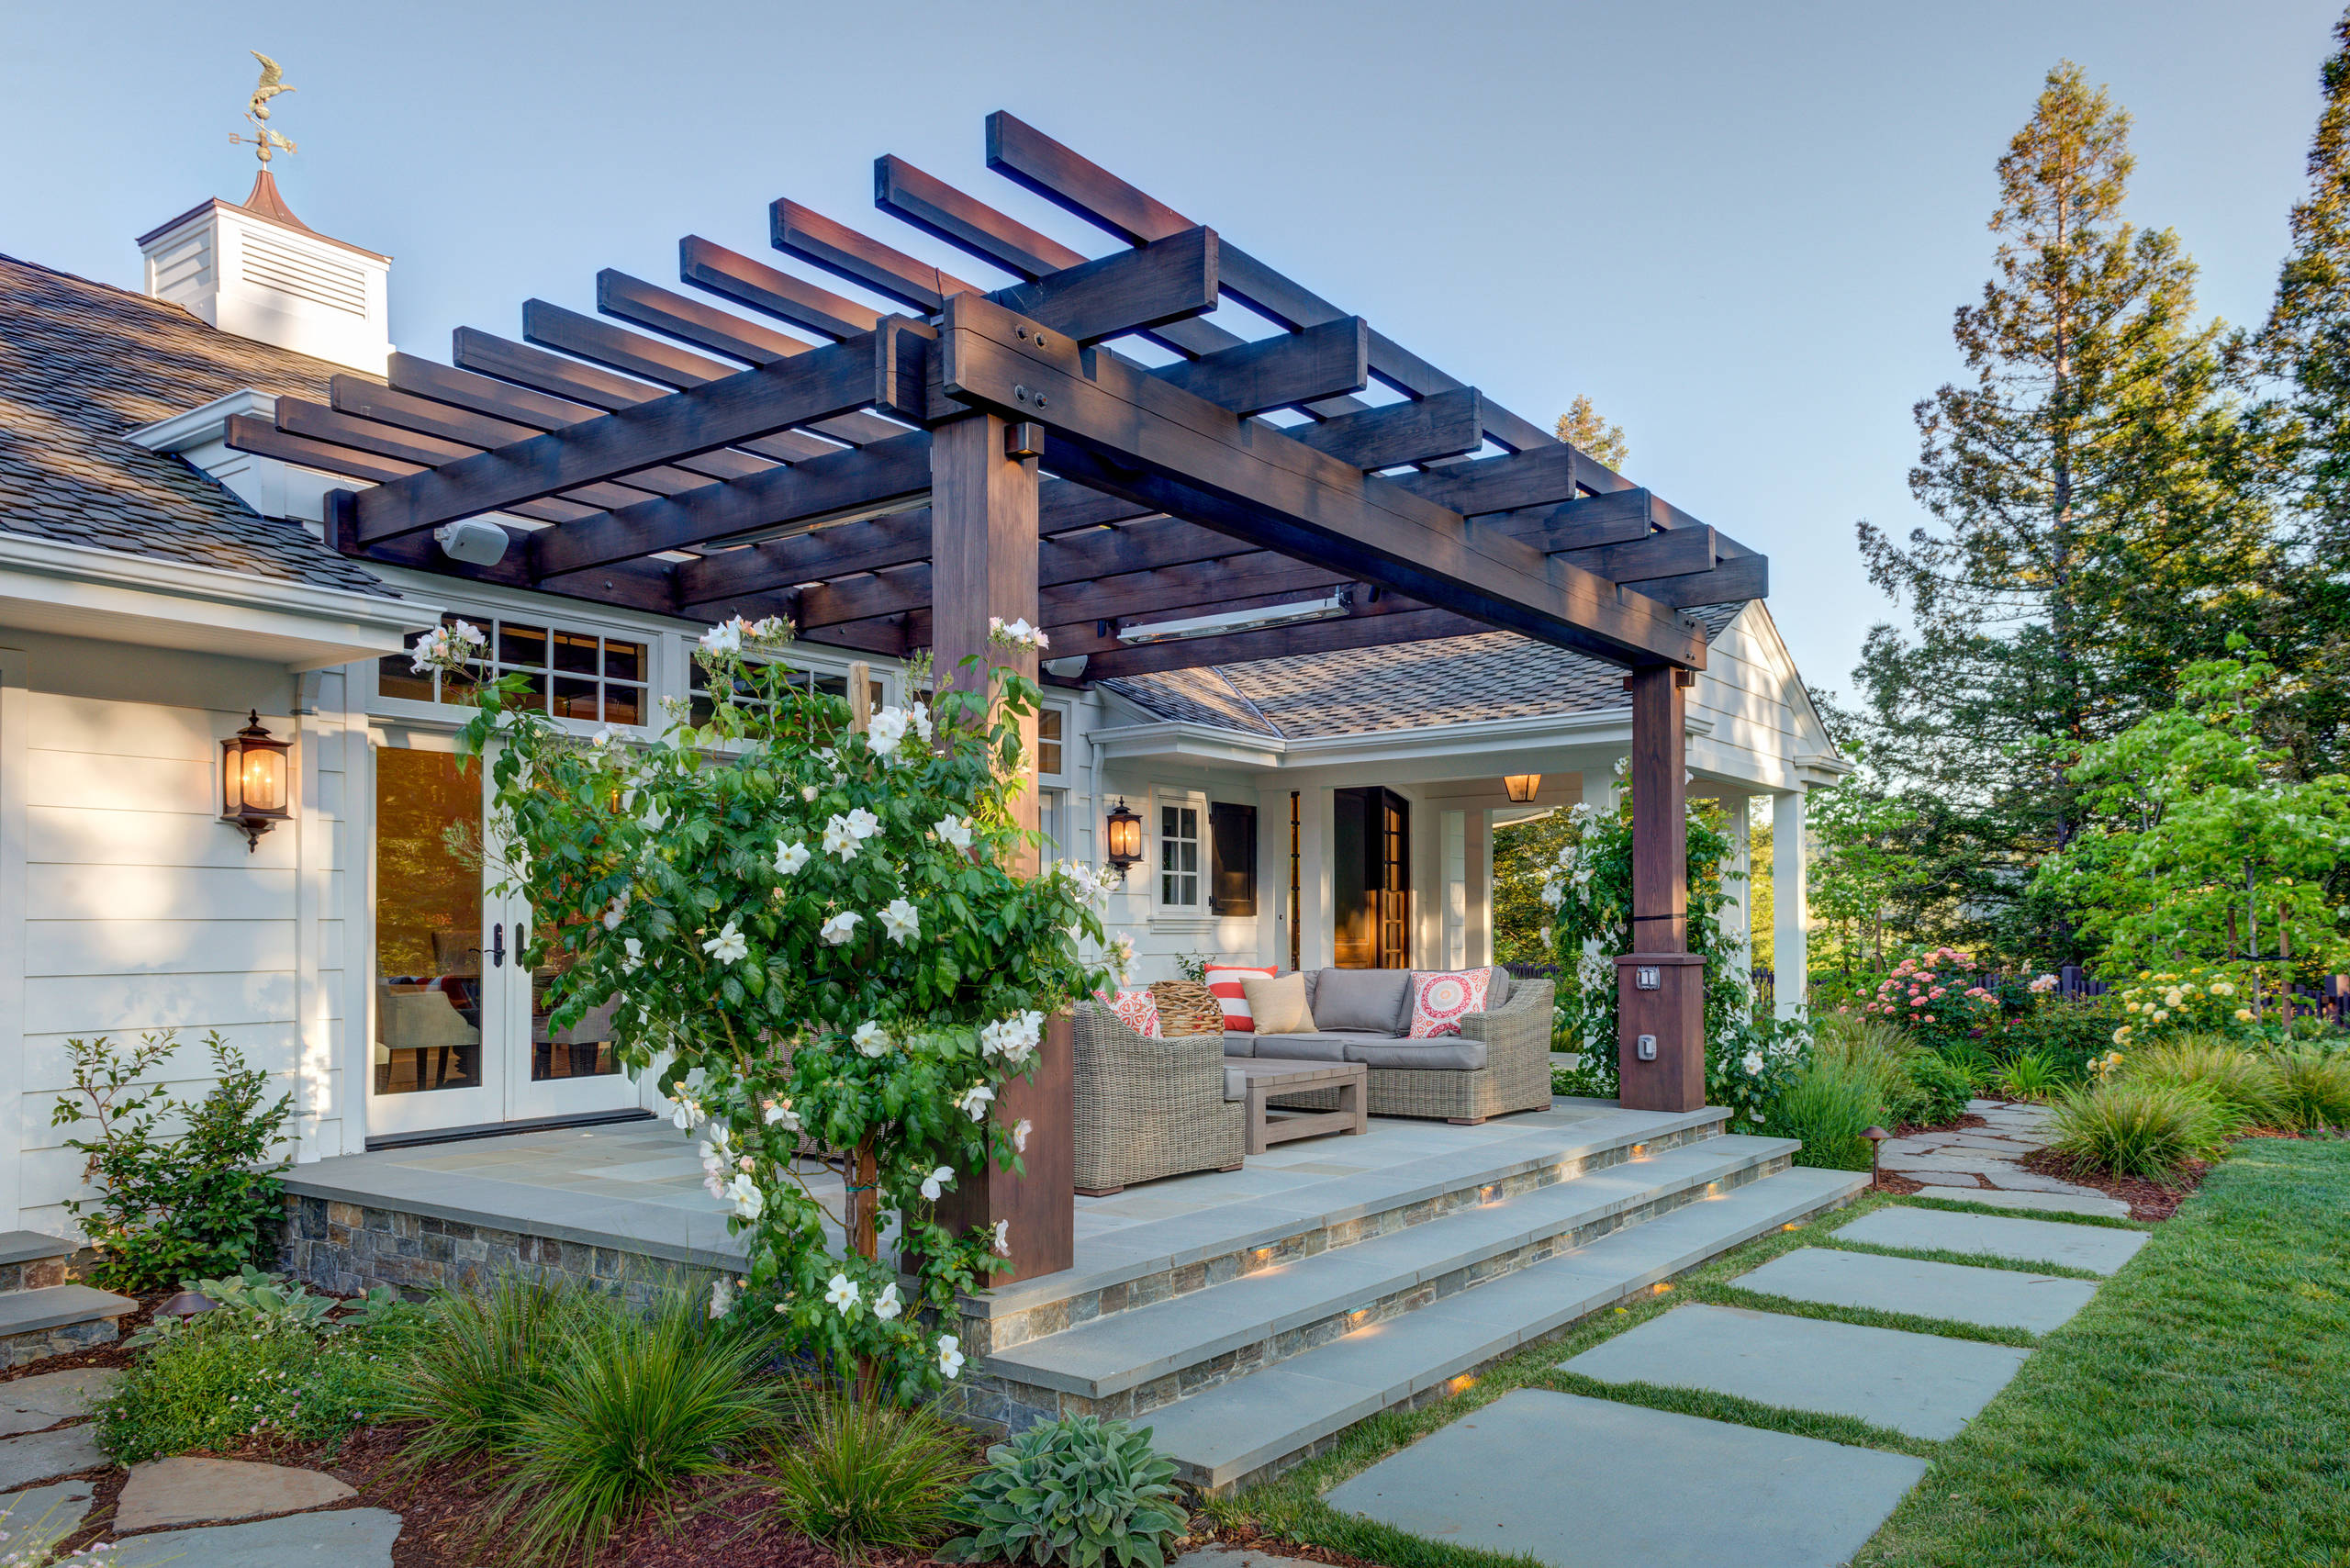 75 Patio with a Pergola Ideas You'll Love - October, 2023 | Houzz